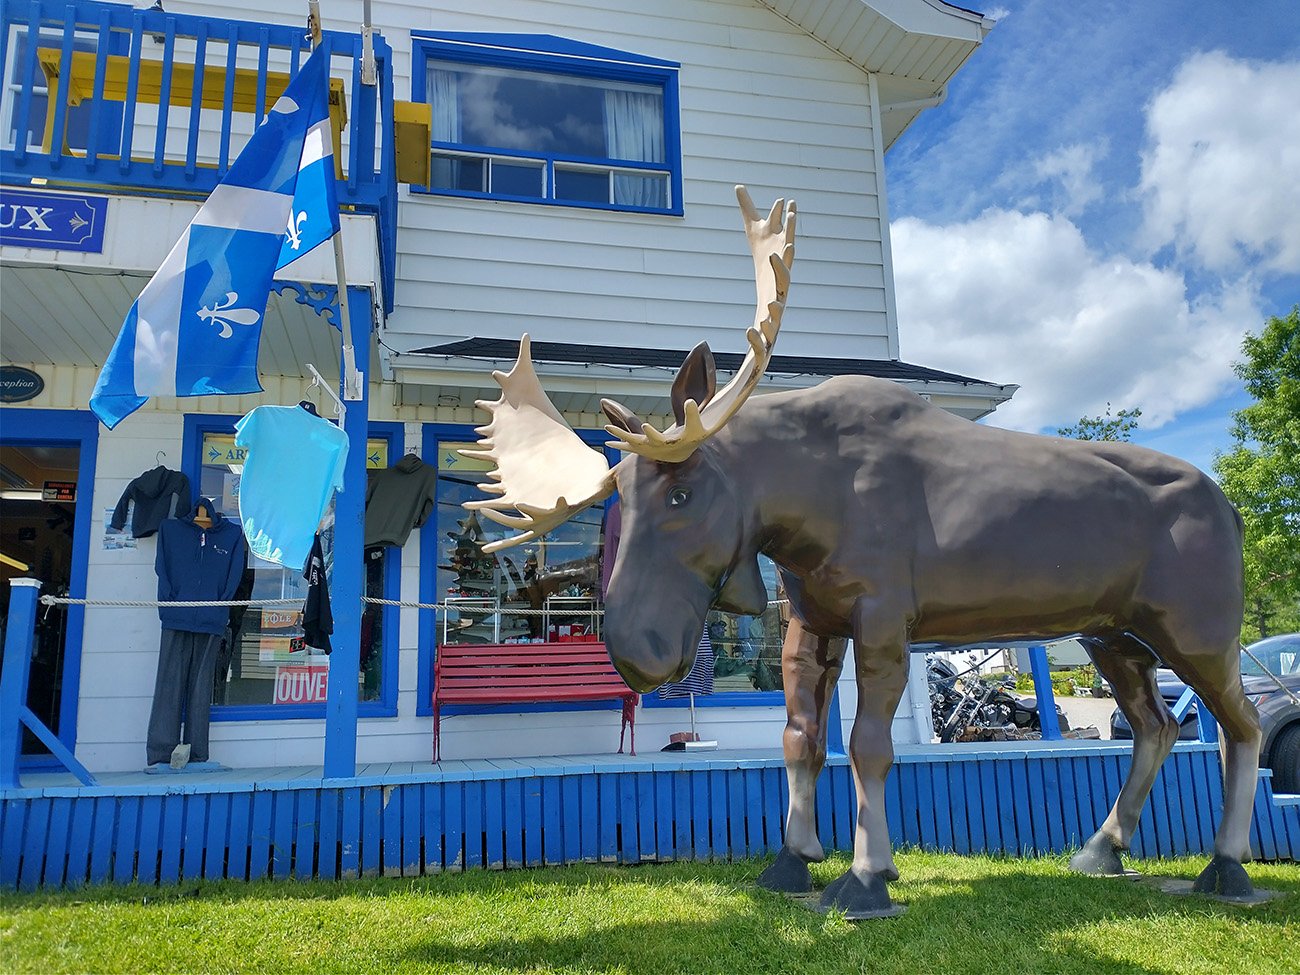 Tourist shop. You need to be at least a level 2 shop to get a moose.